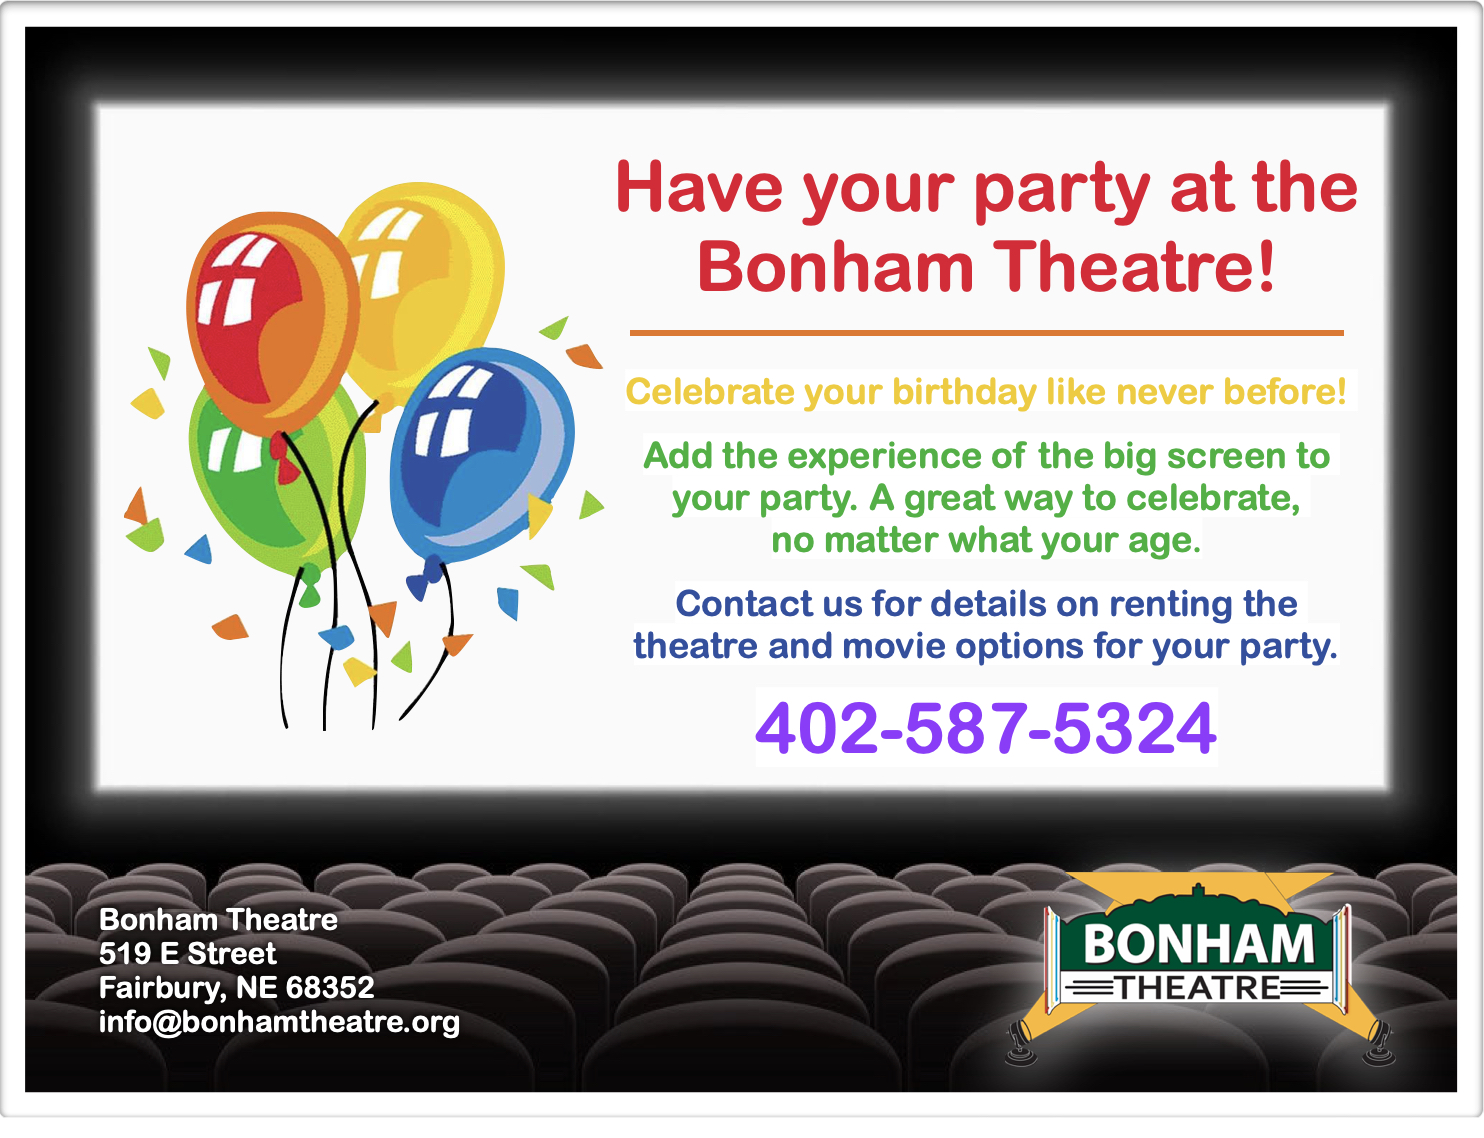 Have your birthday party at the Bonham Theatre!